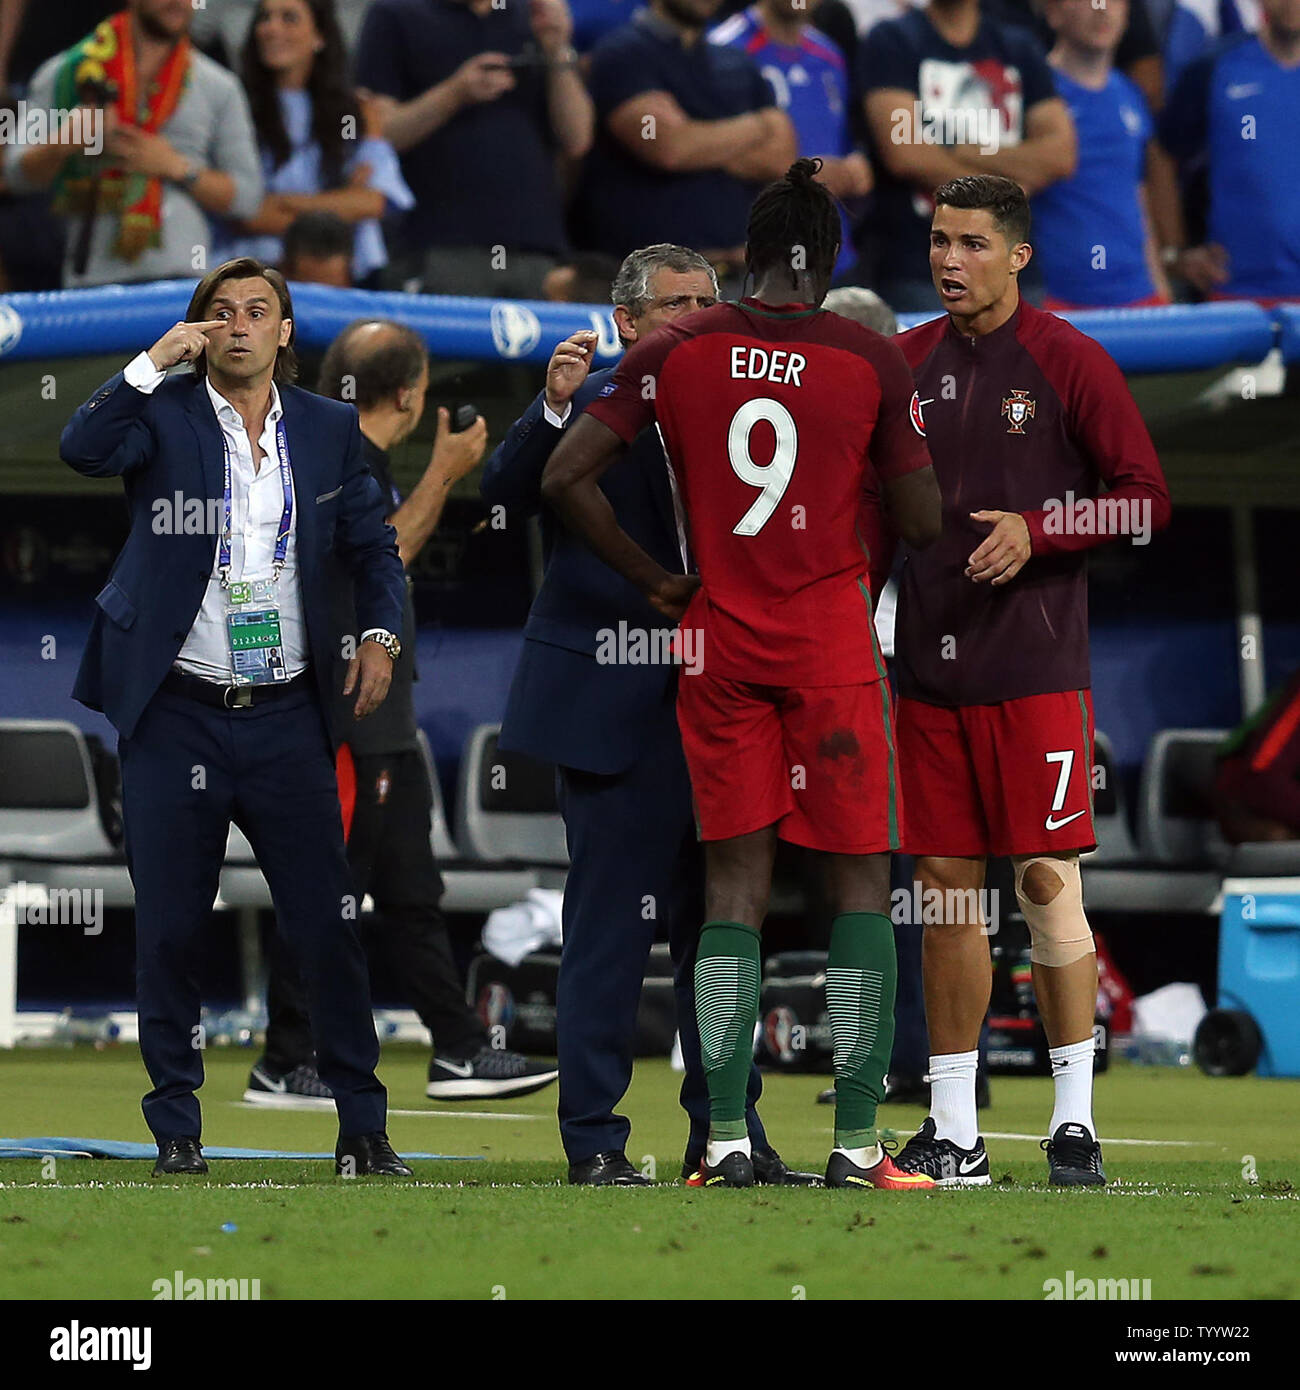 Cristiano Ronaldo of Portugal and coach Fernando Santos pass on instructions to Eder during the Euro 2016 Final match at the Stade de France in Paris, France on July 10, 2016. Portugal beat France 1-0 after extra-time to secure their first European Championship. Photo by Chris Brunskill/UPI Stock Photo